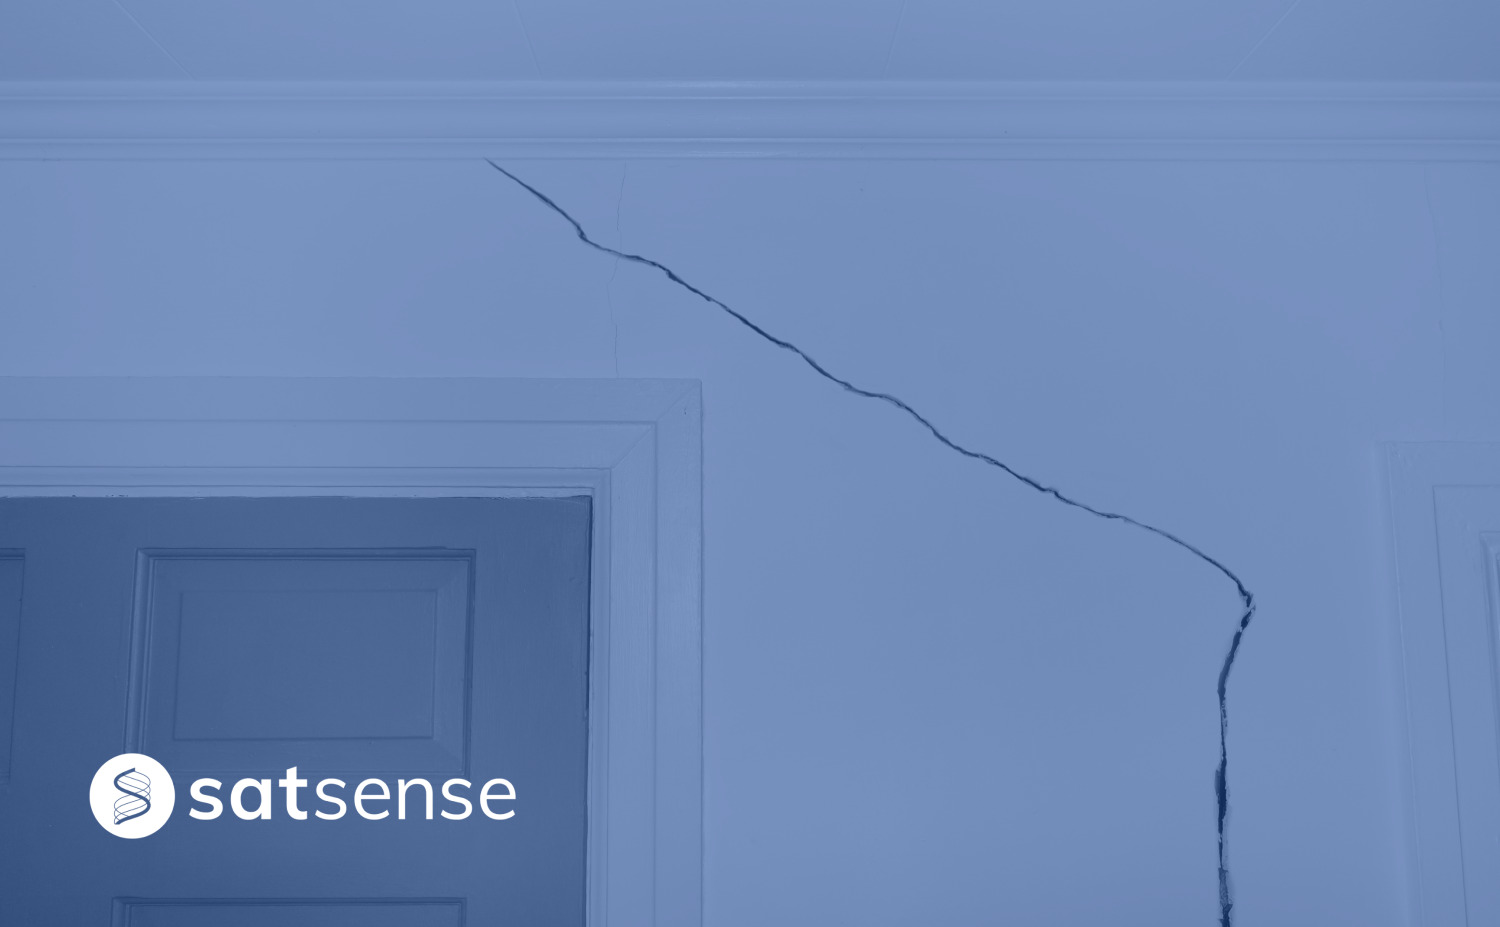 Cracks on the wall of a house with SatSense logo on the bottom left corner